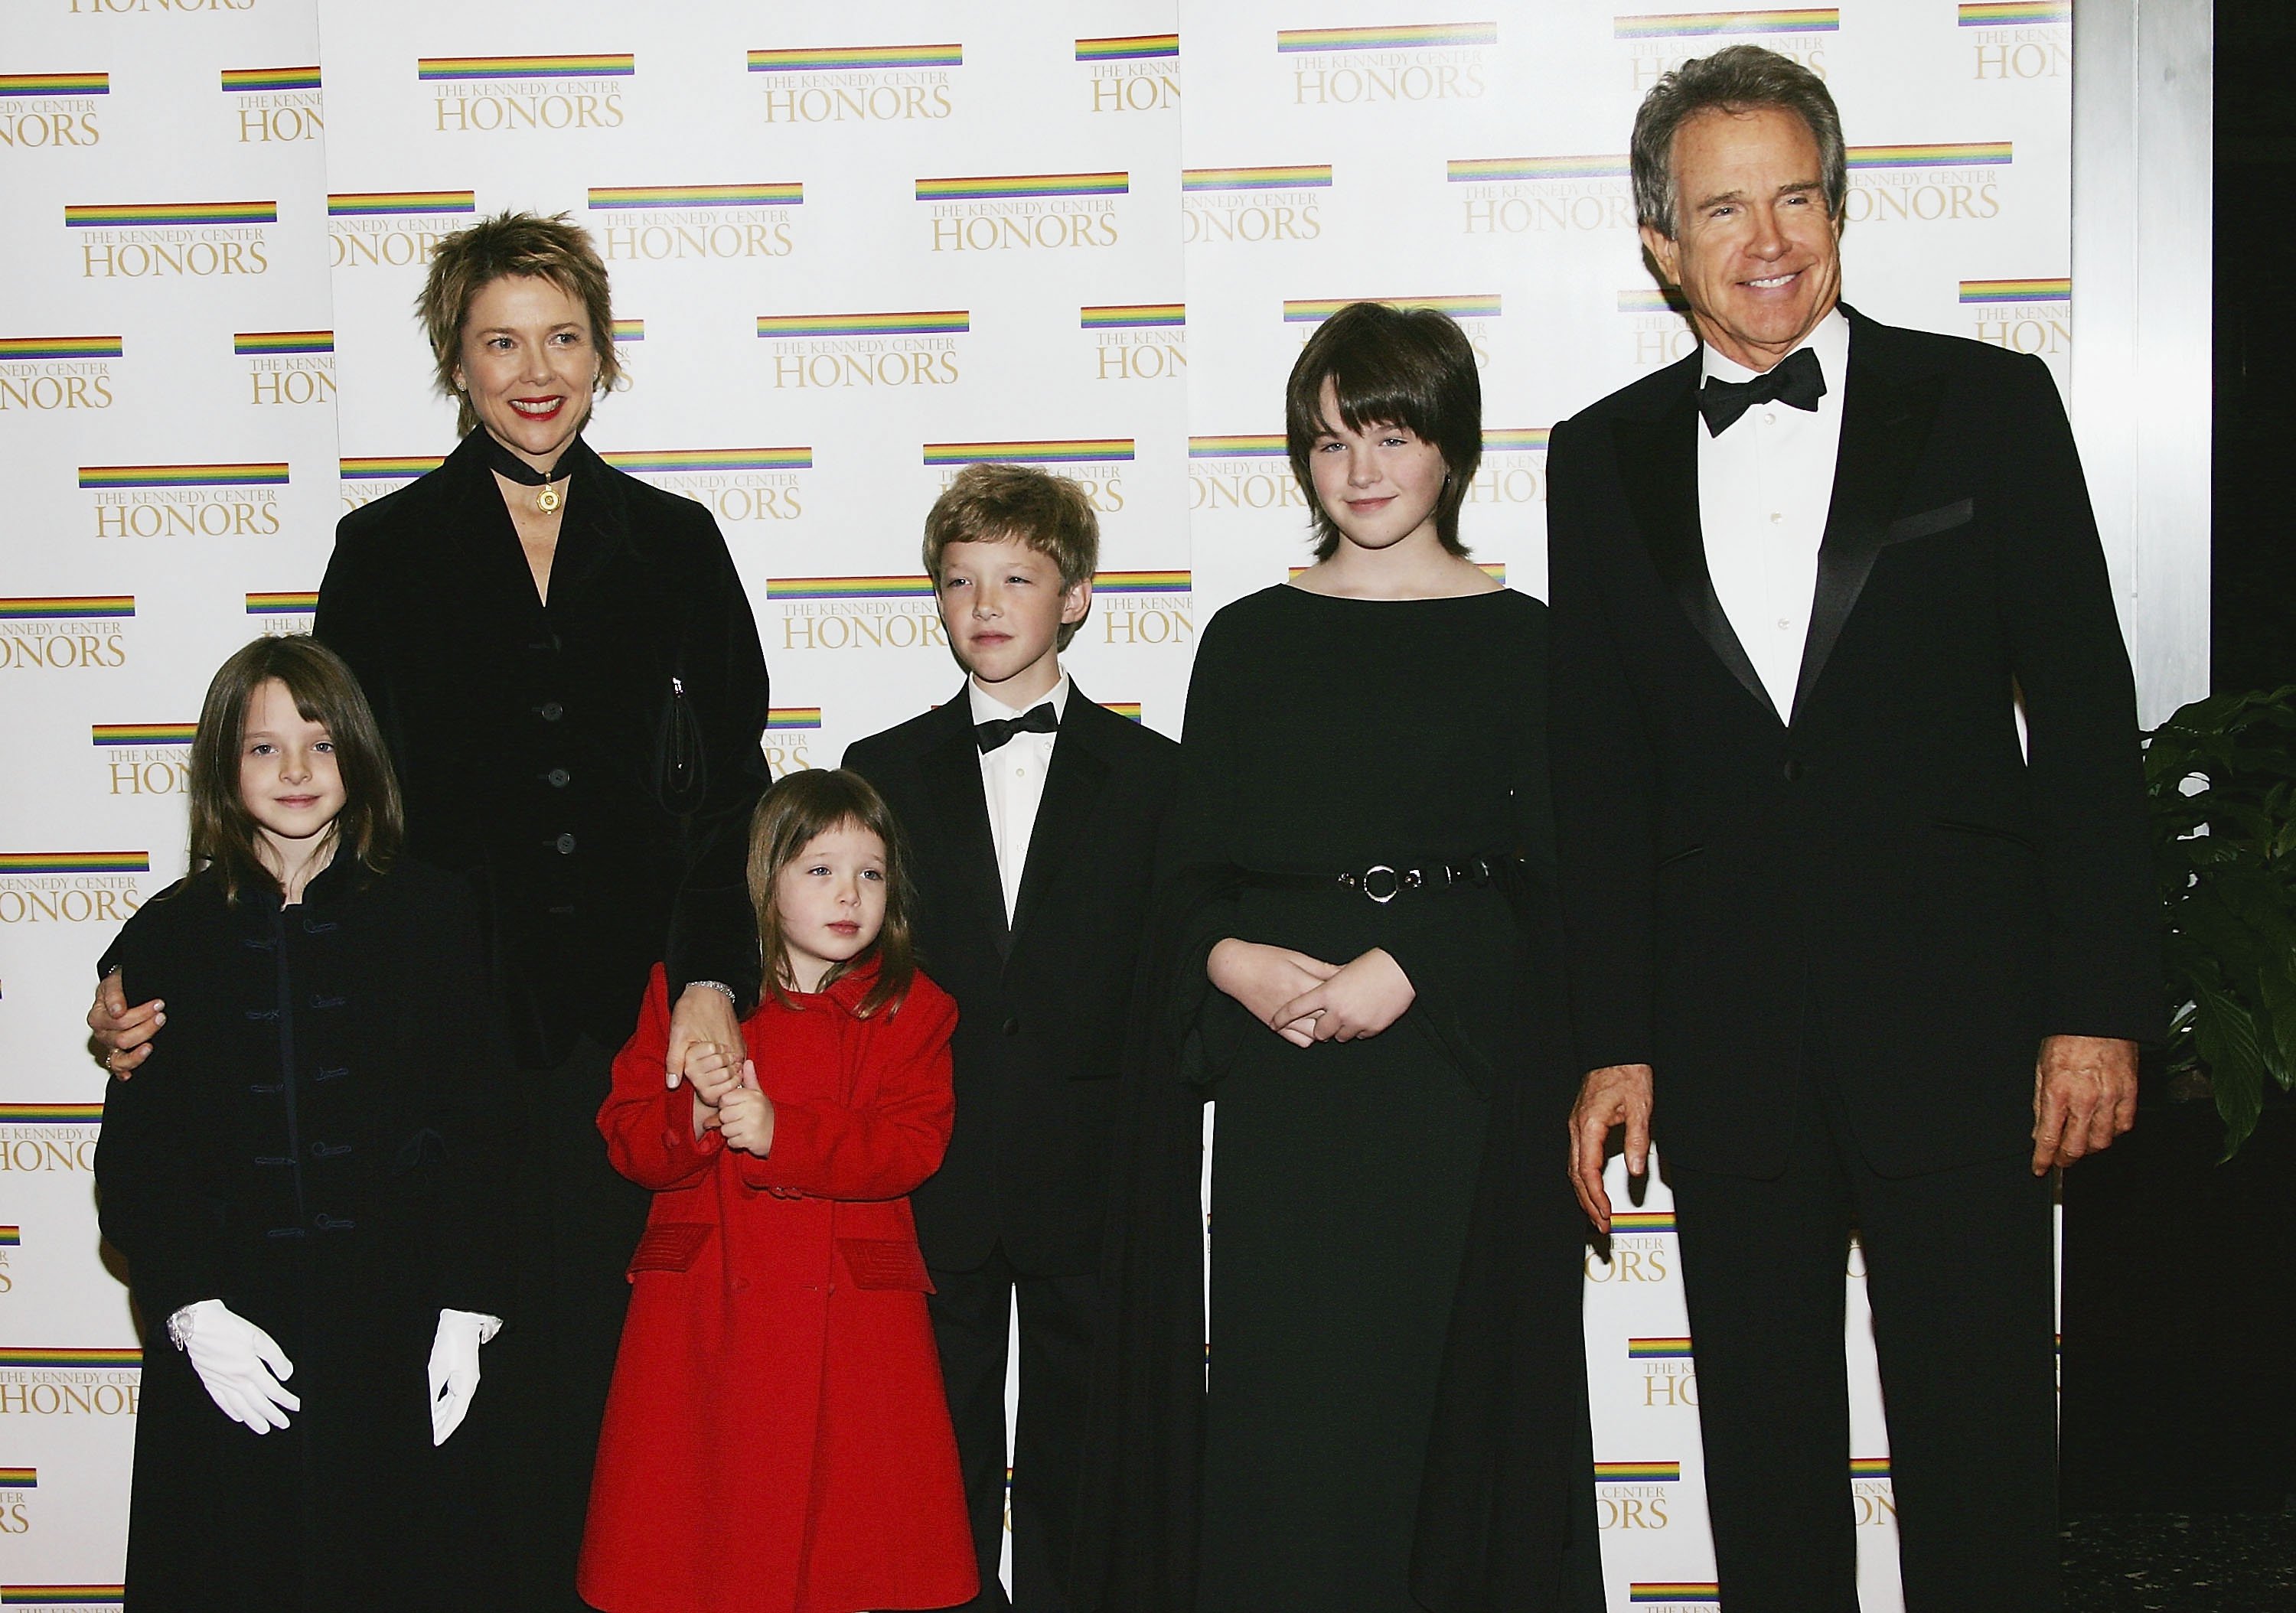 Warren Beatty poses with wife Annette Bening and children Isabel, Ella, Benjamin and Kathlyn at the 27th Annual Kennedy Center Honors at U.S. Department of State, December 4, 2004, in Washington, DC. | Source: Getty Images.